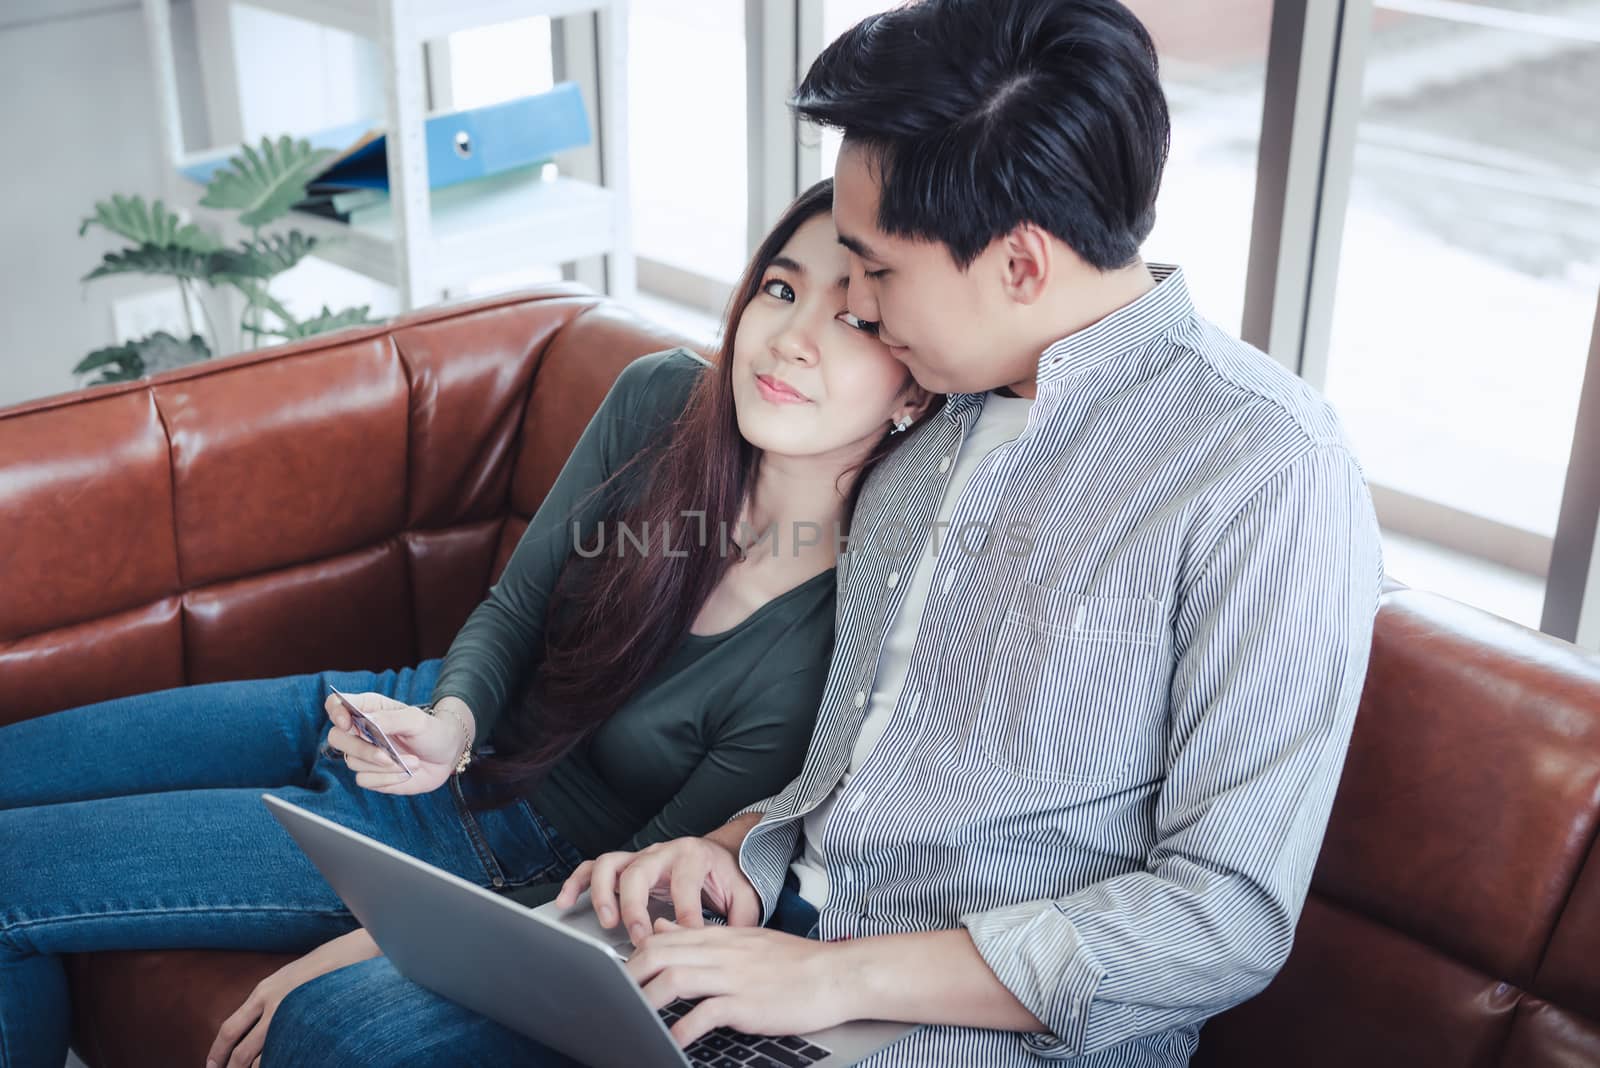 Couple Love Having Enjoy Relaxation on Sofa at Their Home, Attractive Asian Couple Happiness in Romantic Moments at Living Room While Online Shopping and Work at Home. Relaxing and Lifestyles Concept